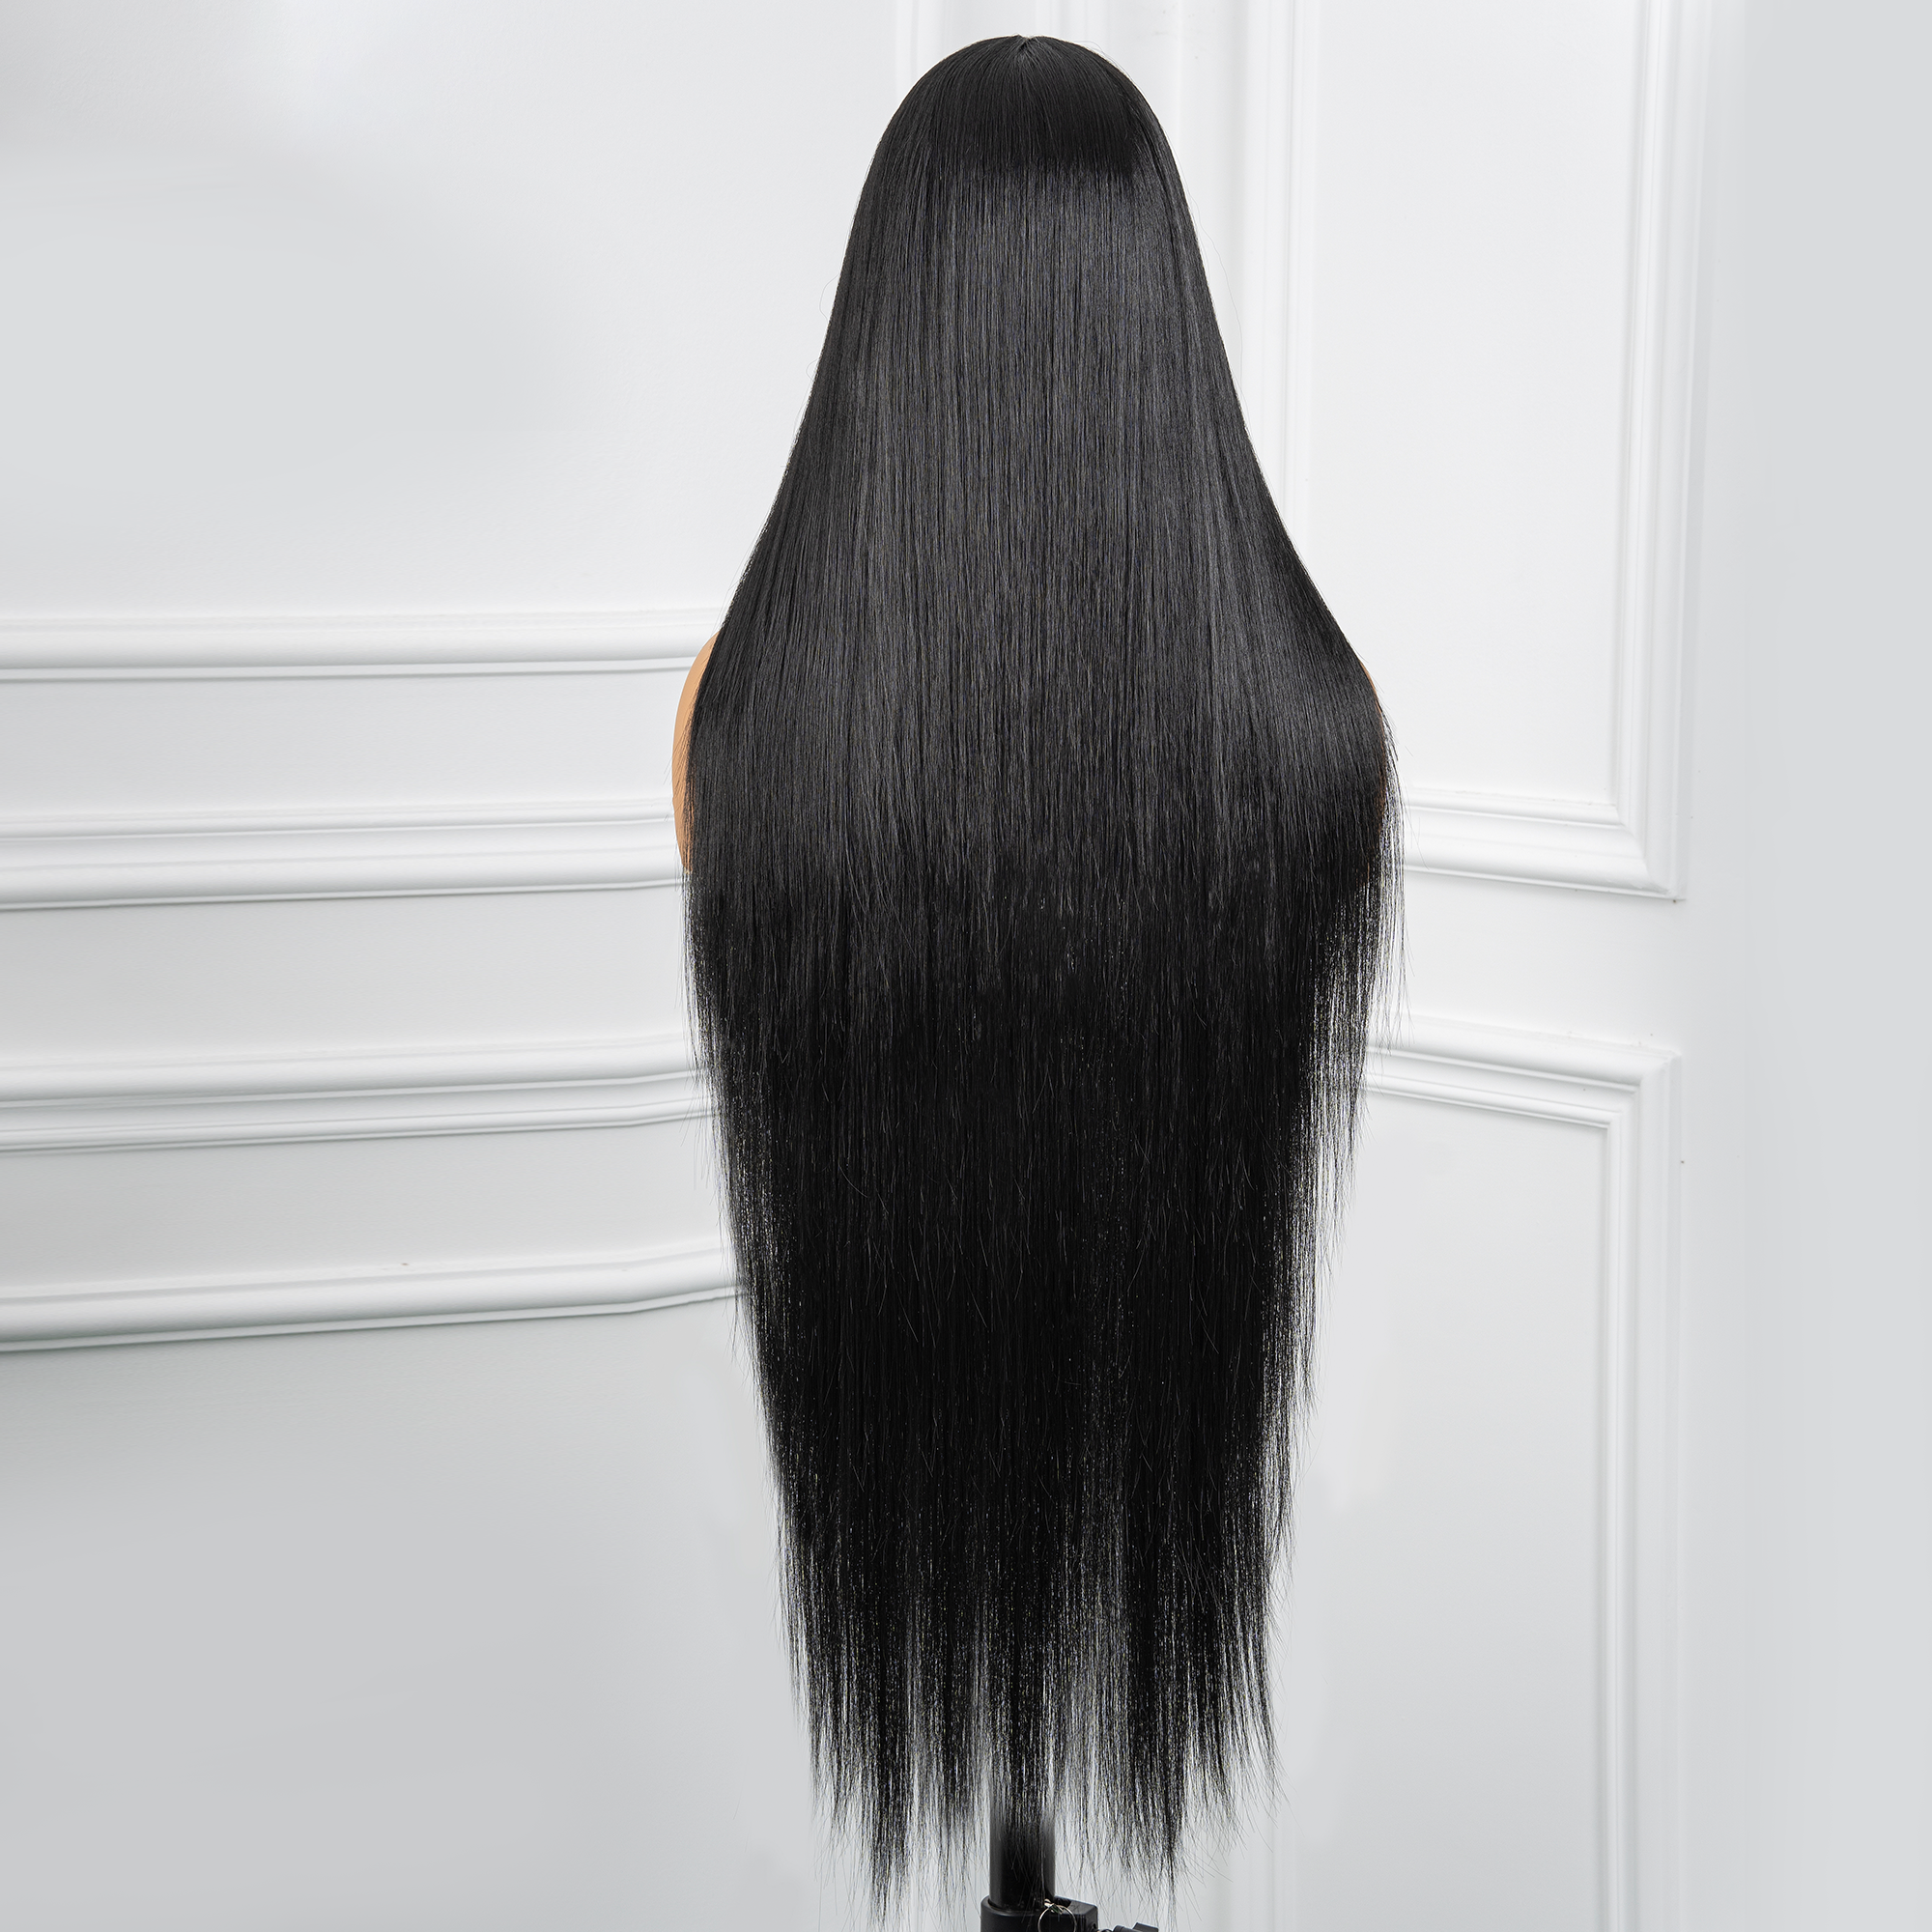 𝓟𝓲𝓼𝓬𝓮𝓼 | TOYOTRESS OUTRE LONG 36 INCH AIRY YAKI STRAIGHT T-MIDDLE PART LACE FRONT WIGS WITH BABY HAIR | 36 INCH SUPER SLAY LONG SOFT HUMAN HAIR RIVAL NATURAL BLACK  WIG(1472)